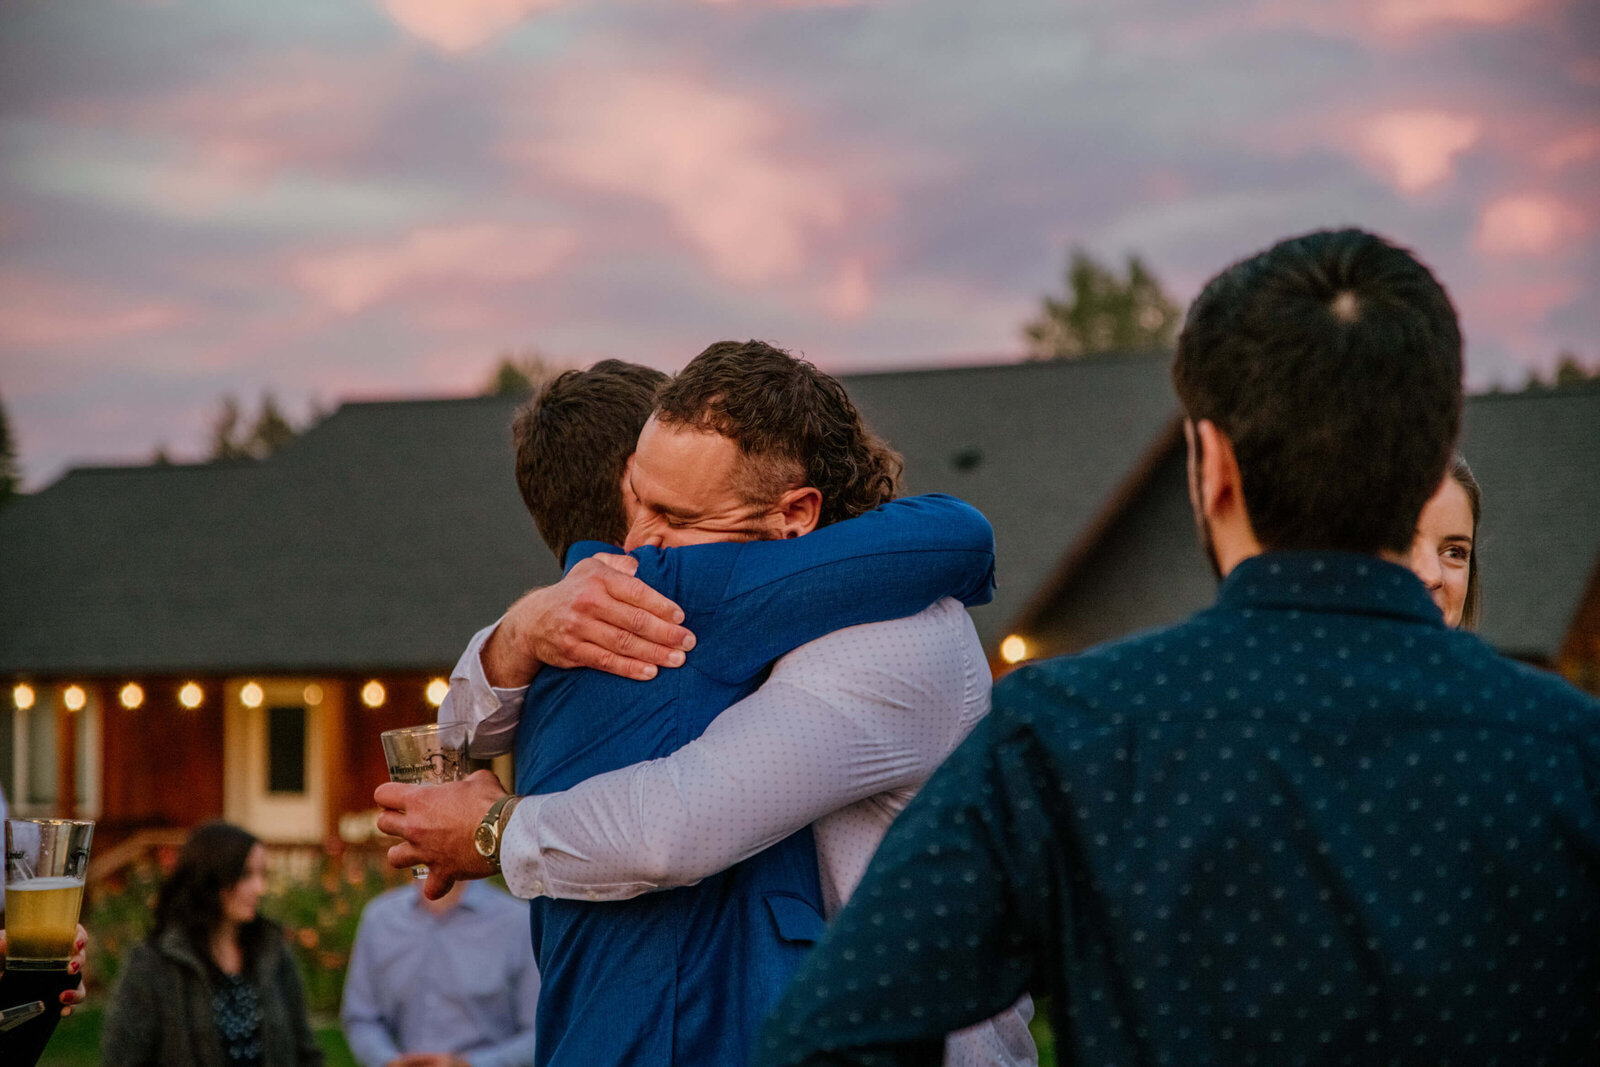 Friends embrace the Groom.